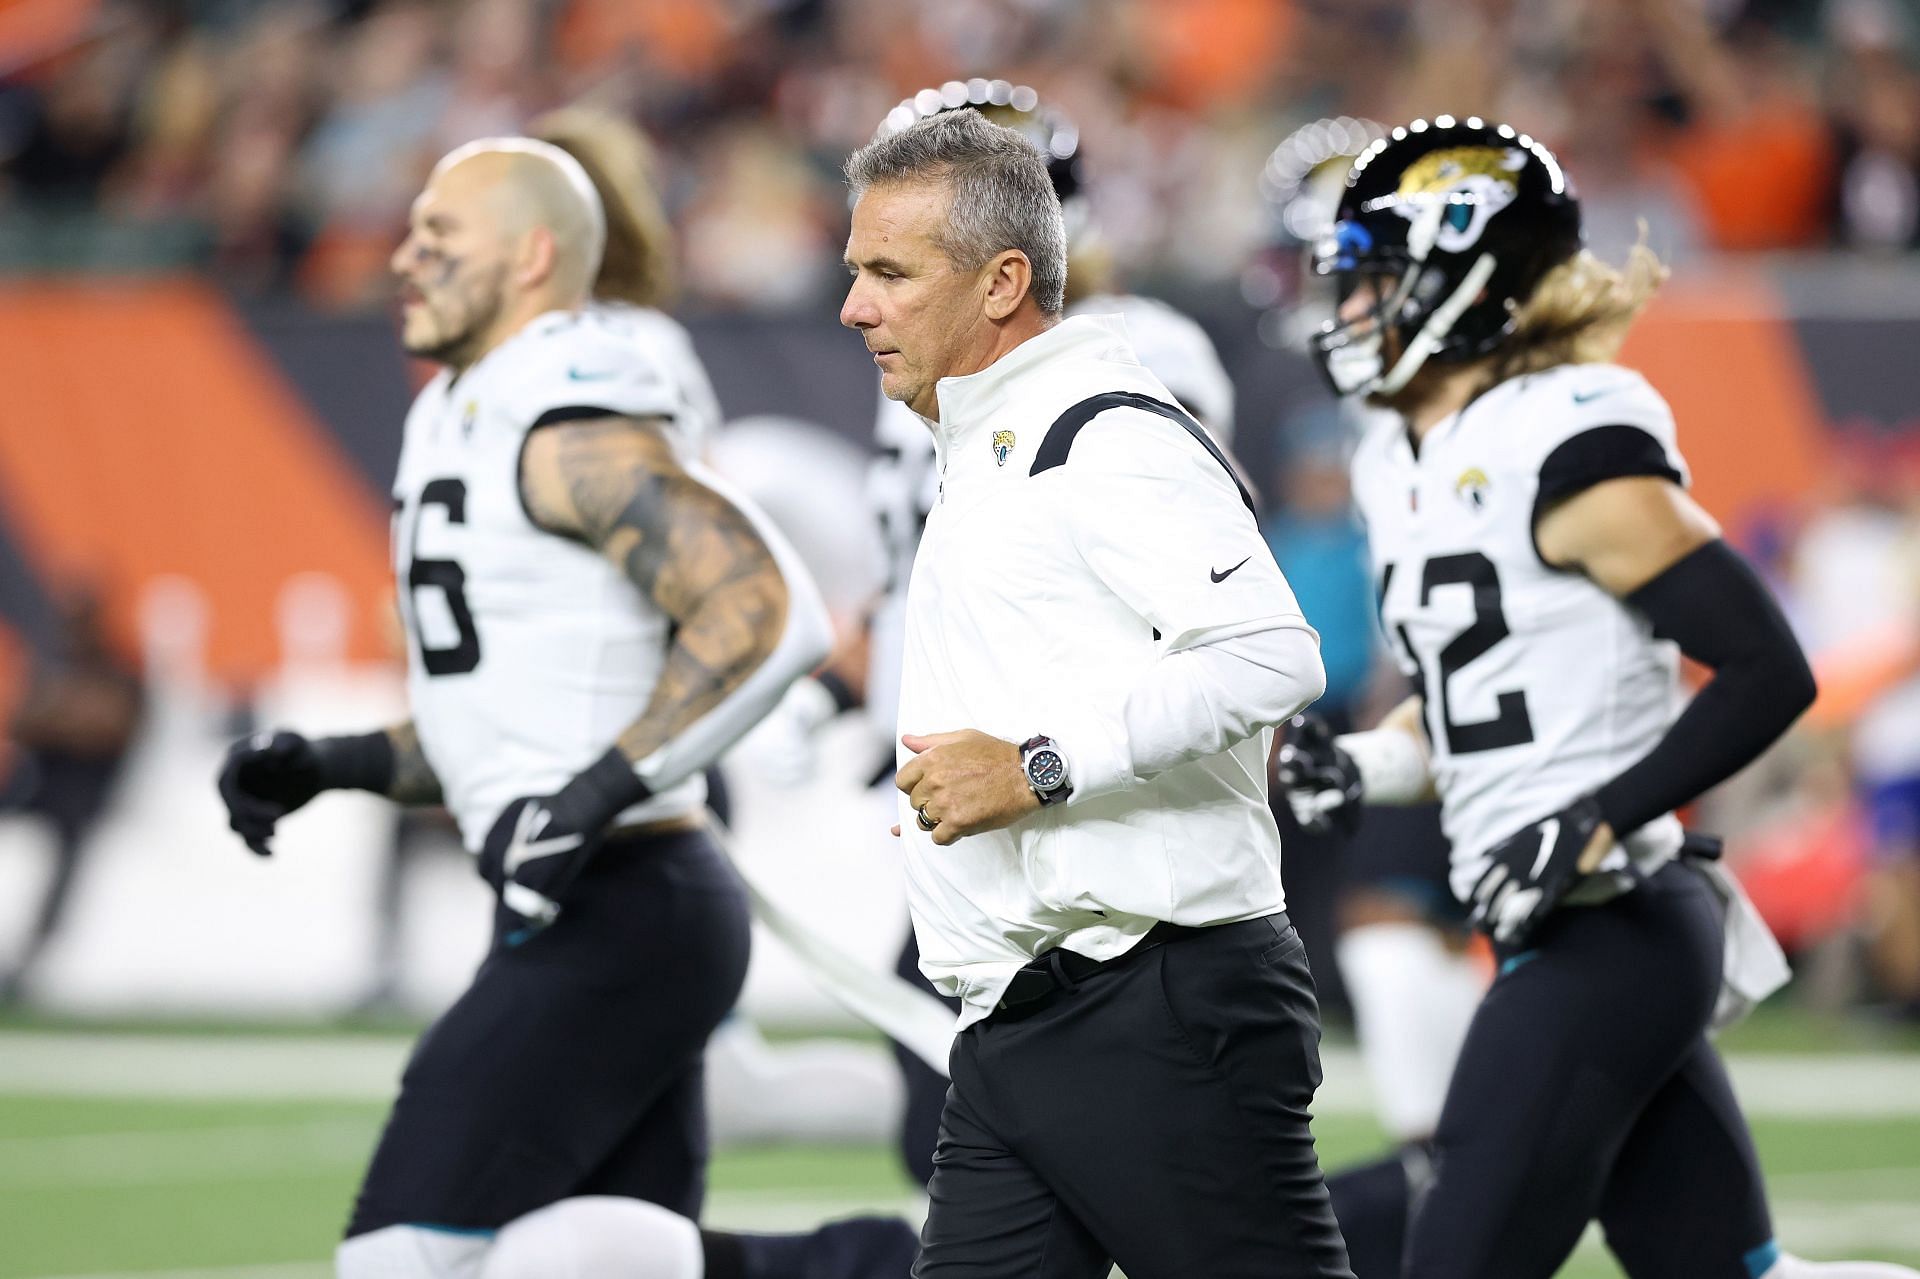 Meyer and his team walks off the field after the September loss to Cleveland (Photo: Getty)